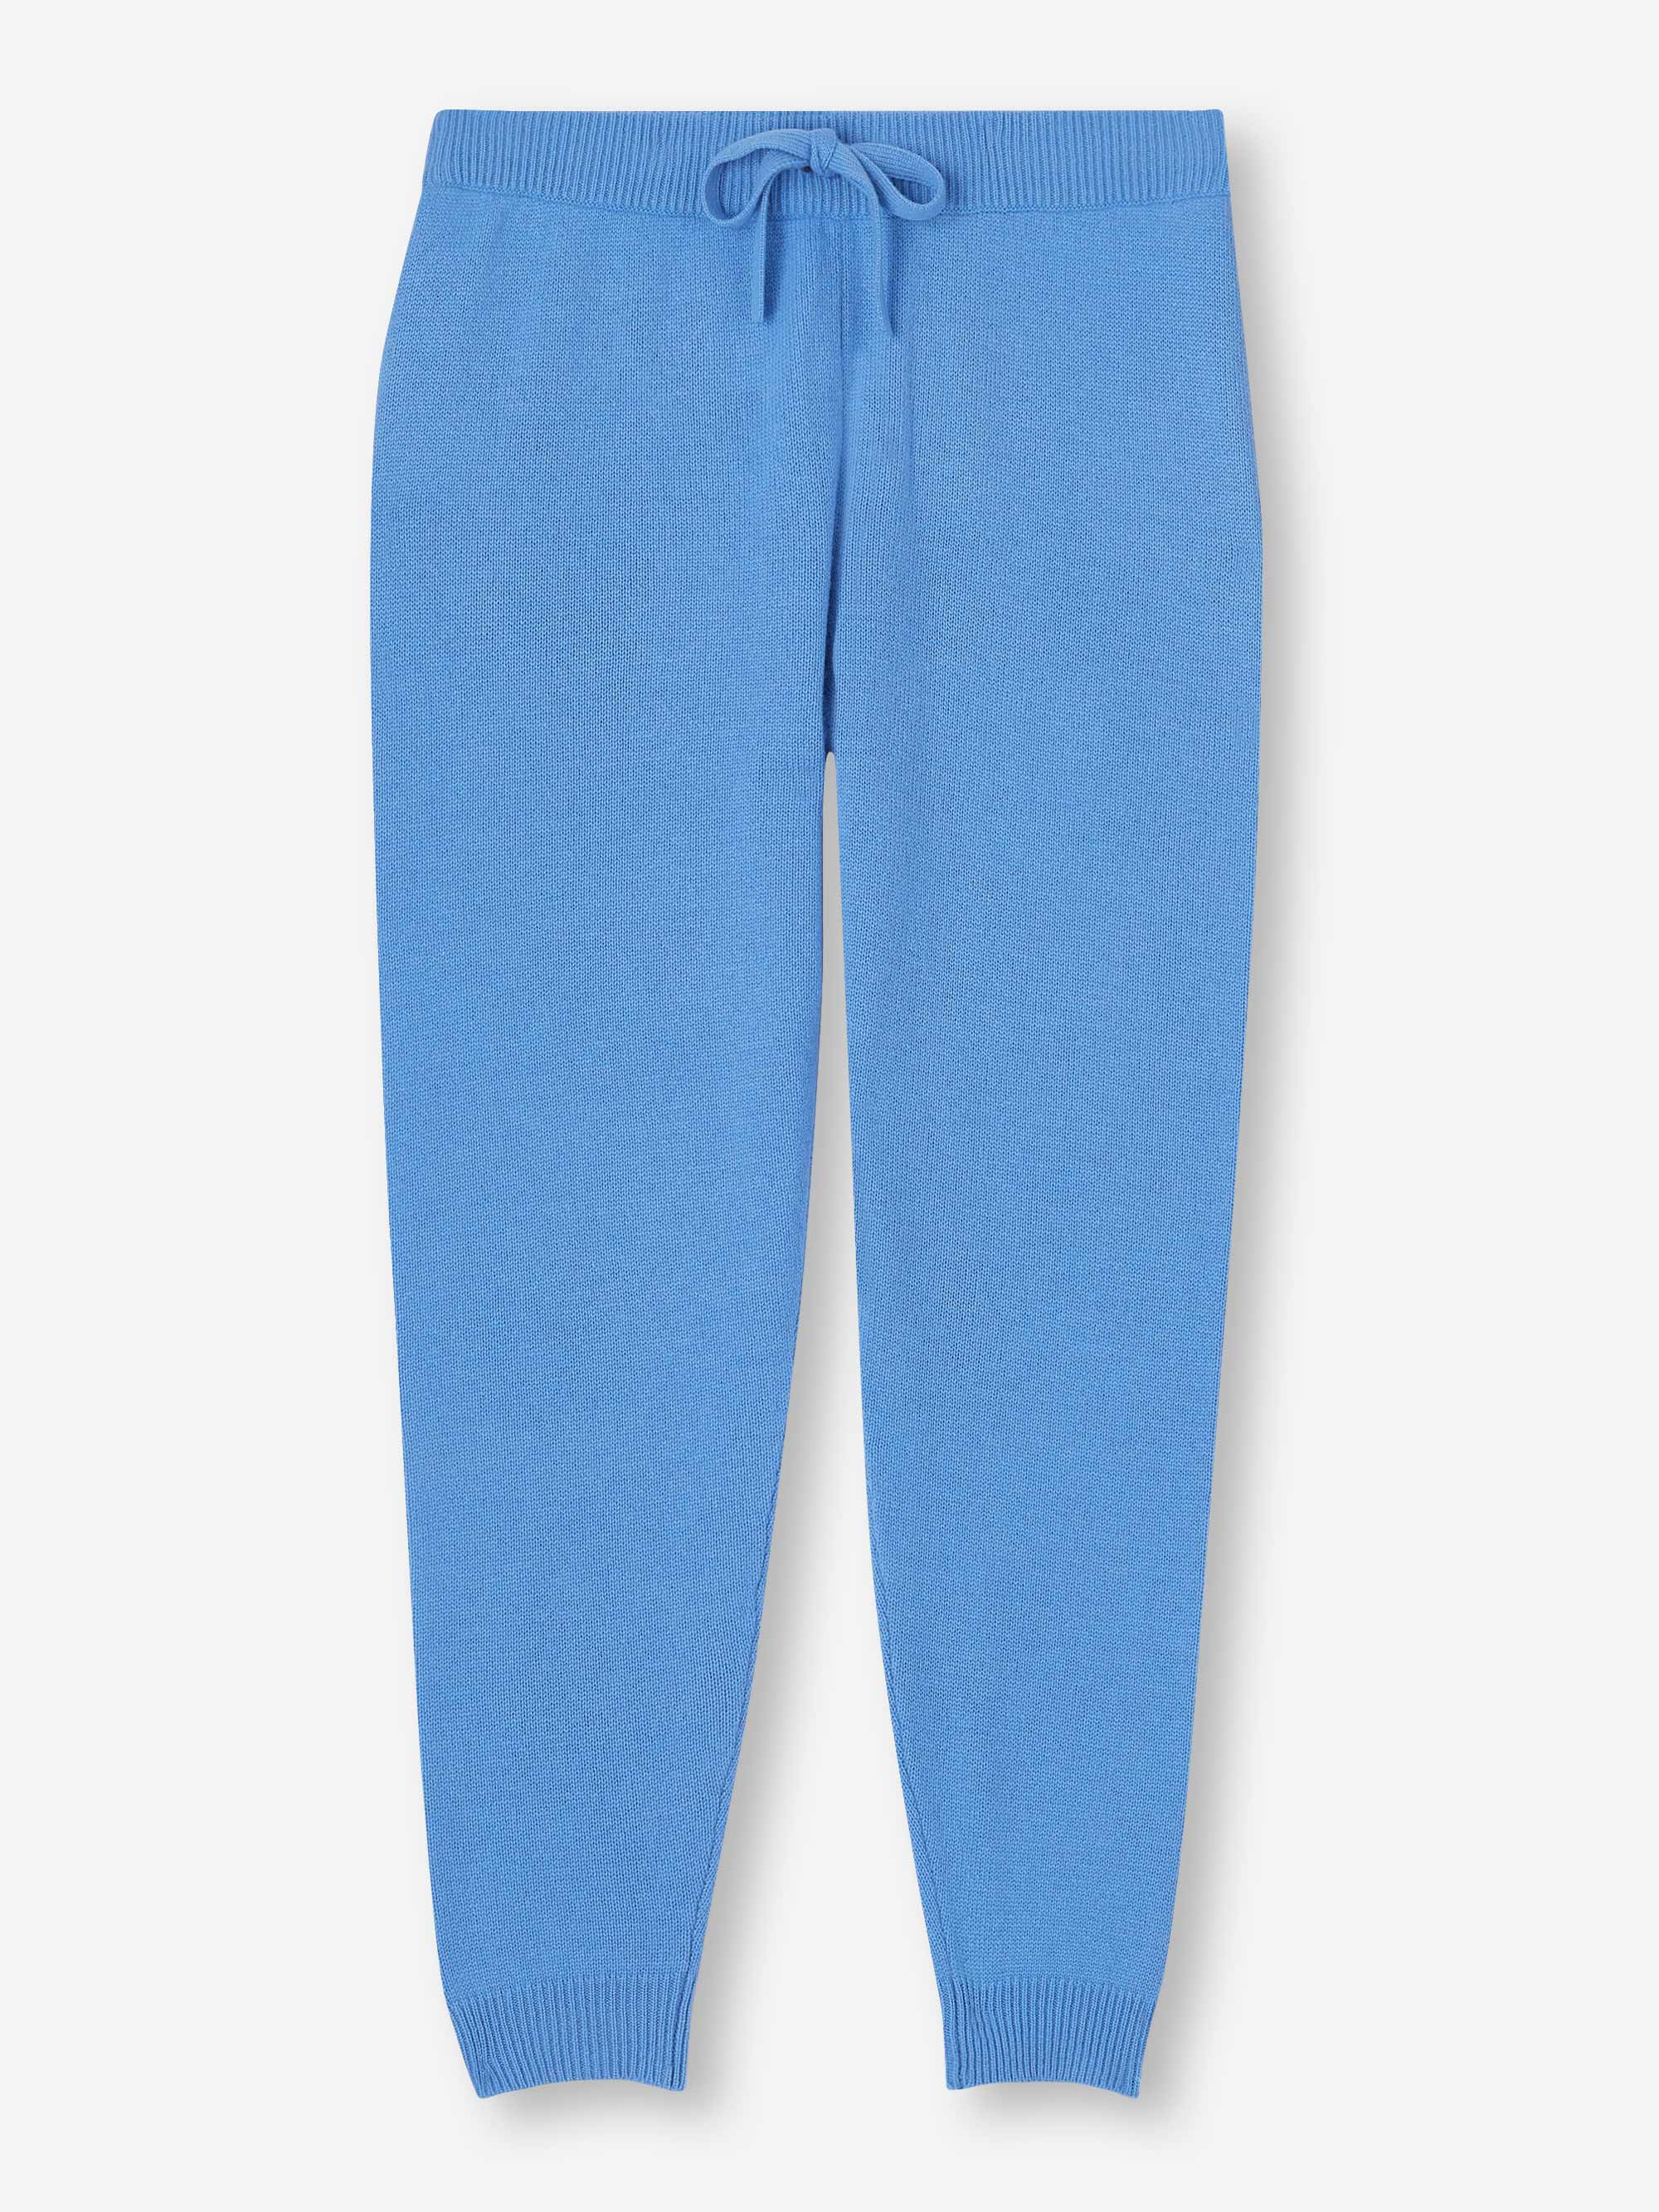 Buy HERE&NOW Men Blue Solid Joggers - Track Pants for Men 20192304 | Myntra